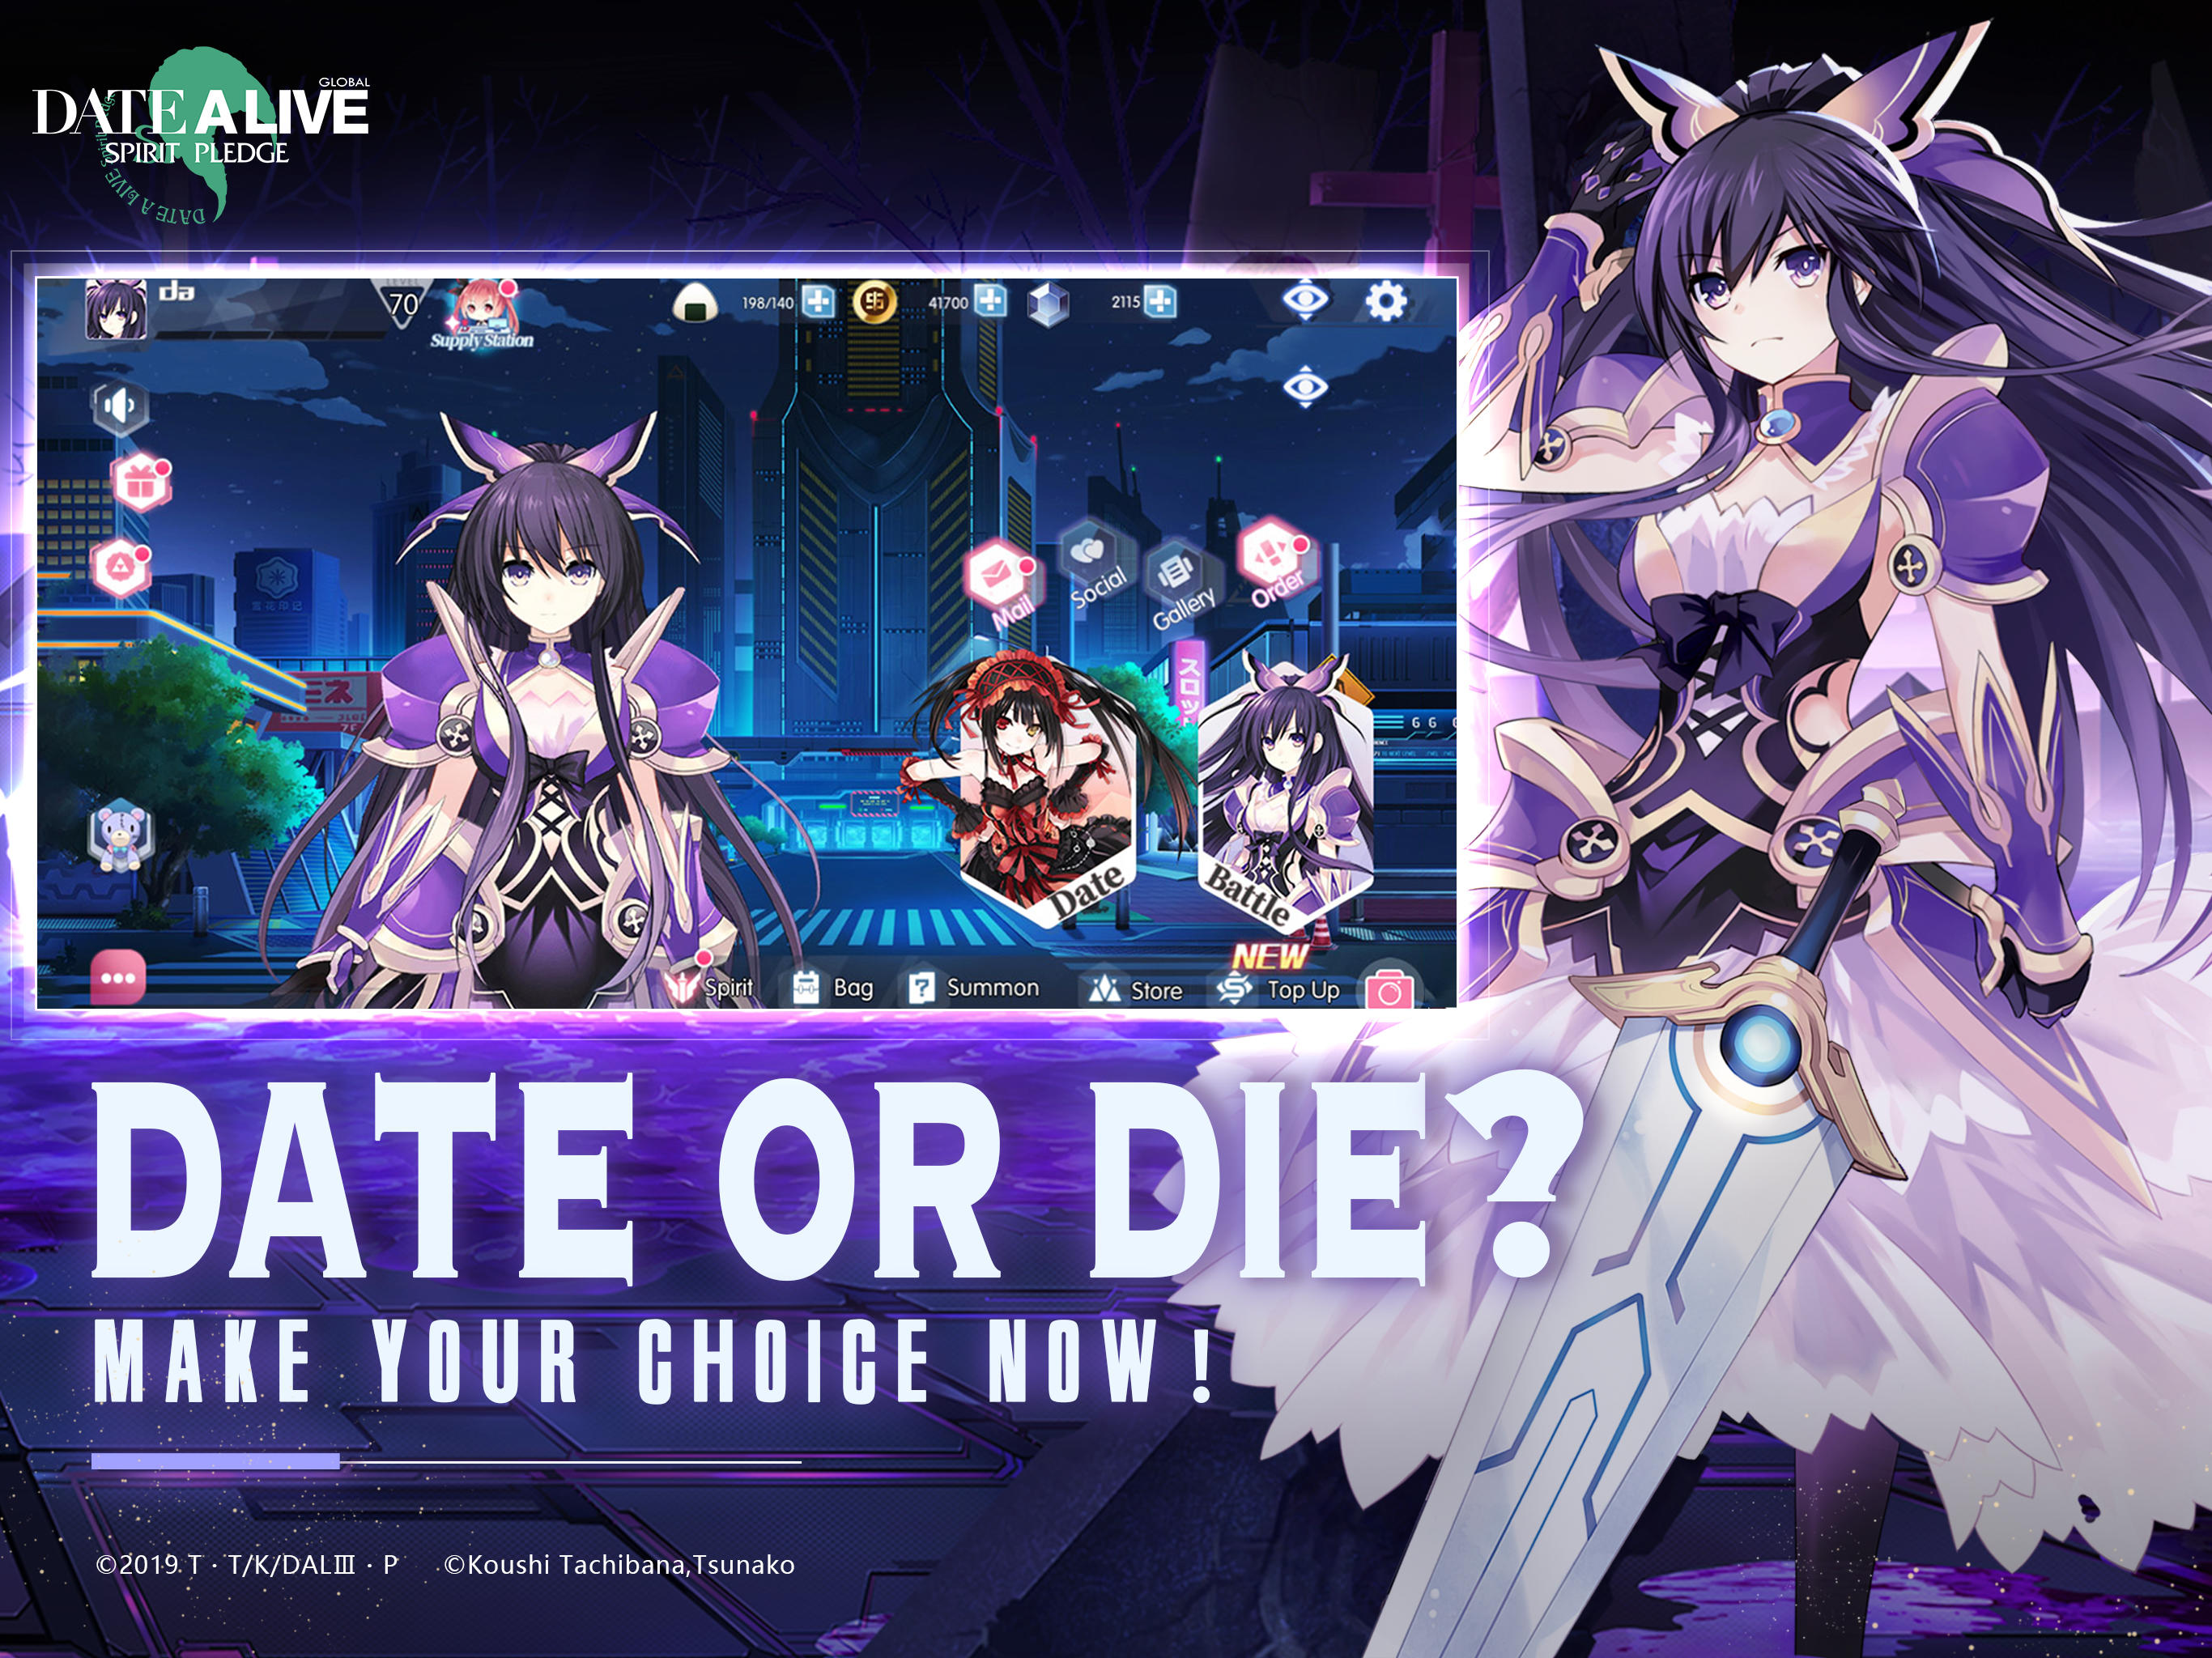 Date a Live: Spirit Pledge - Play Gacha Role-playing Game Free